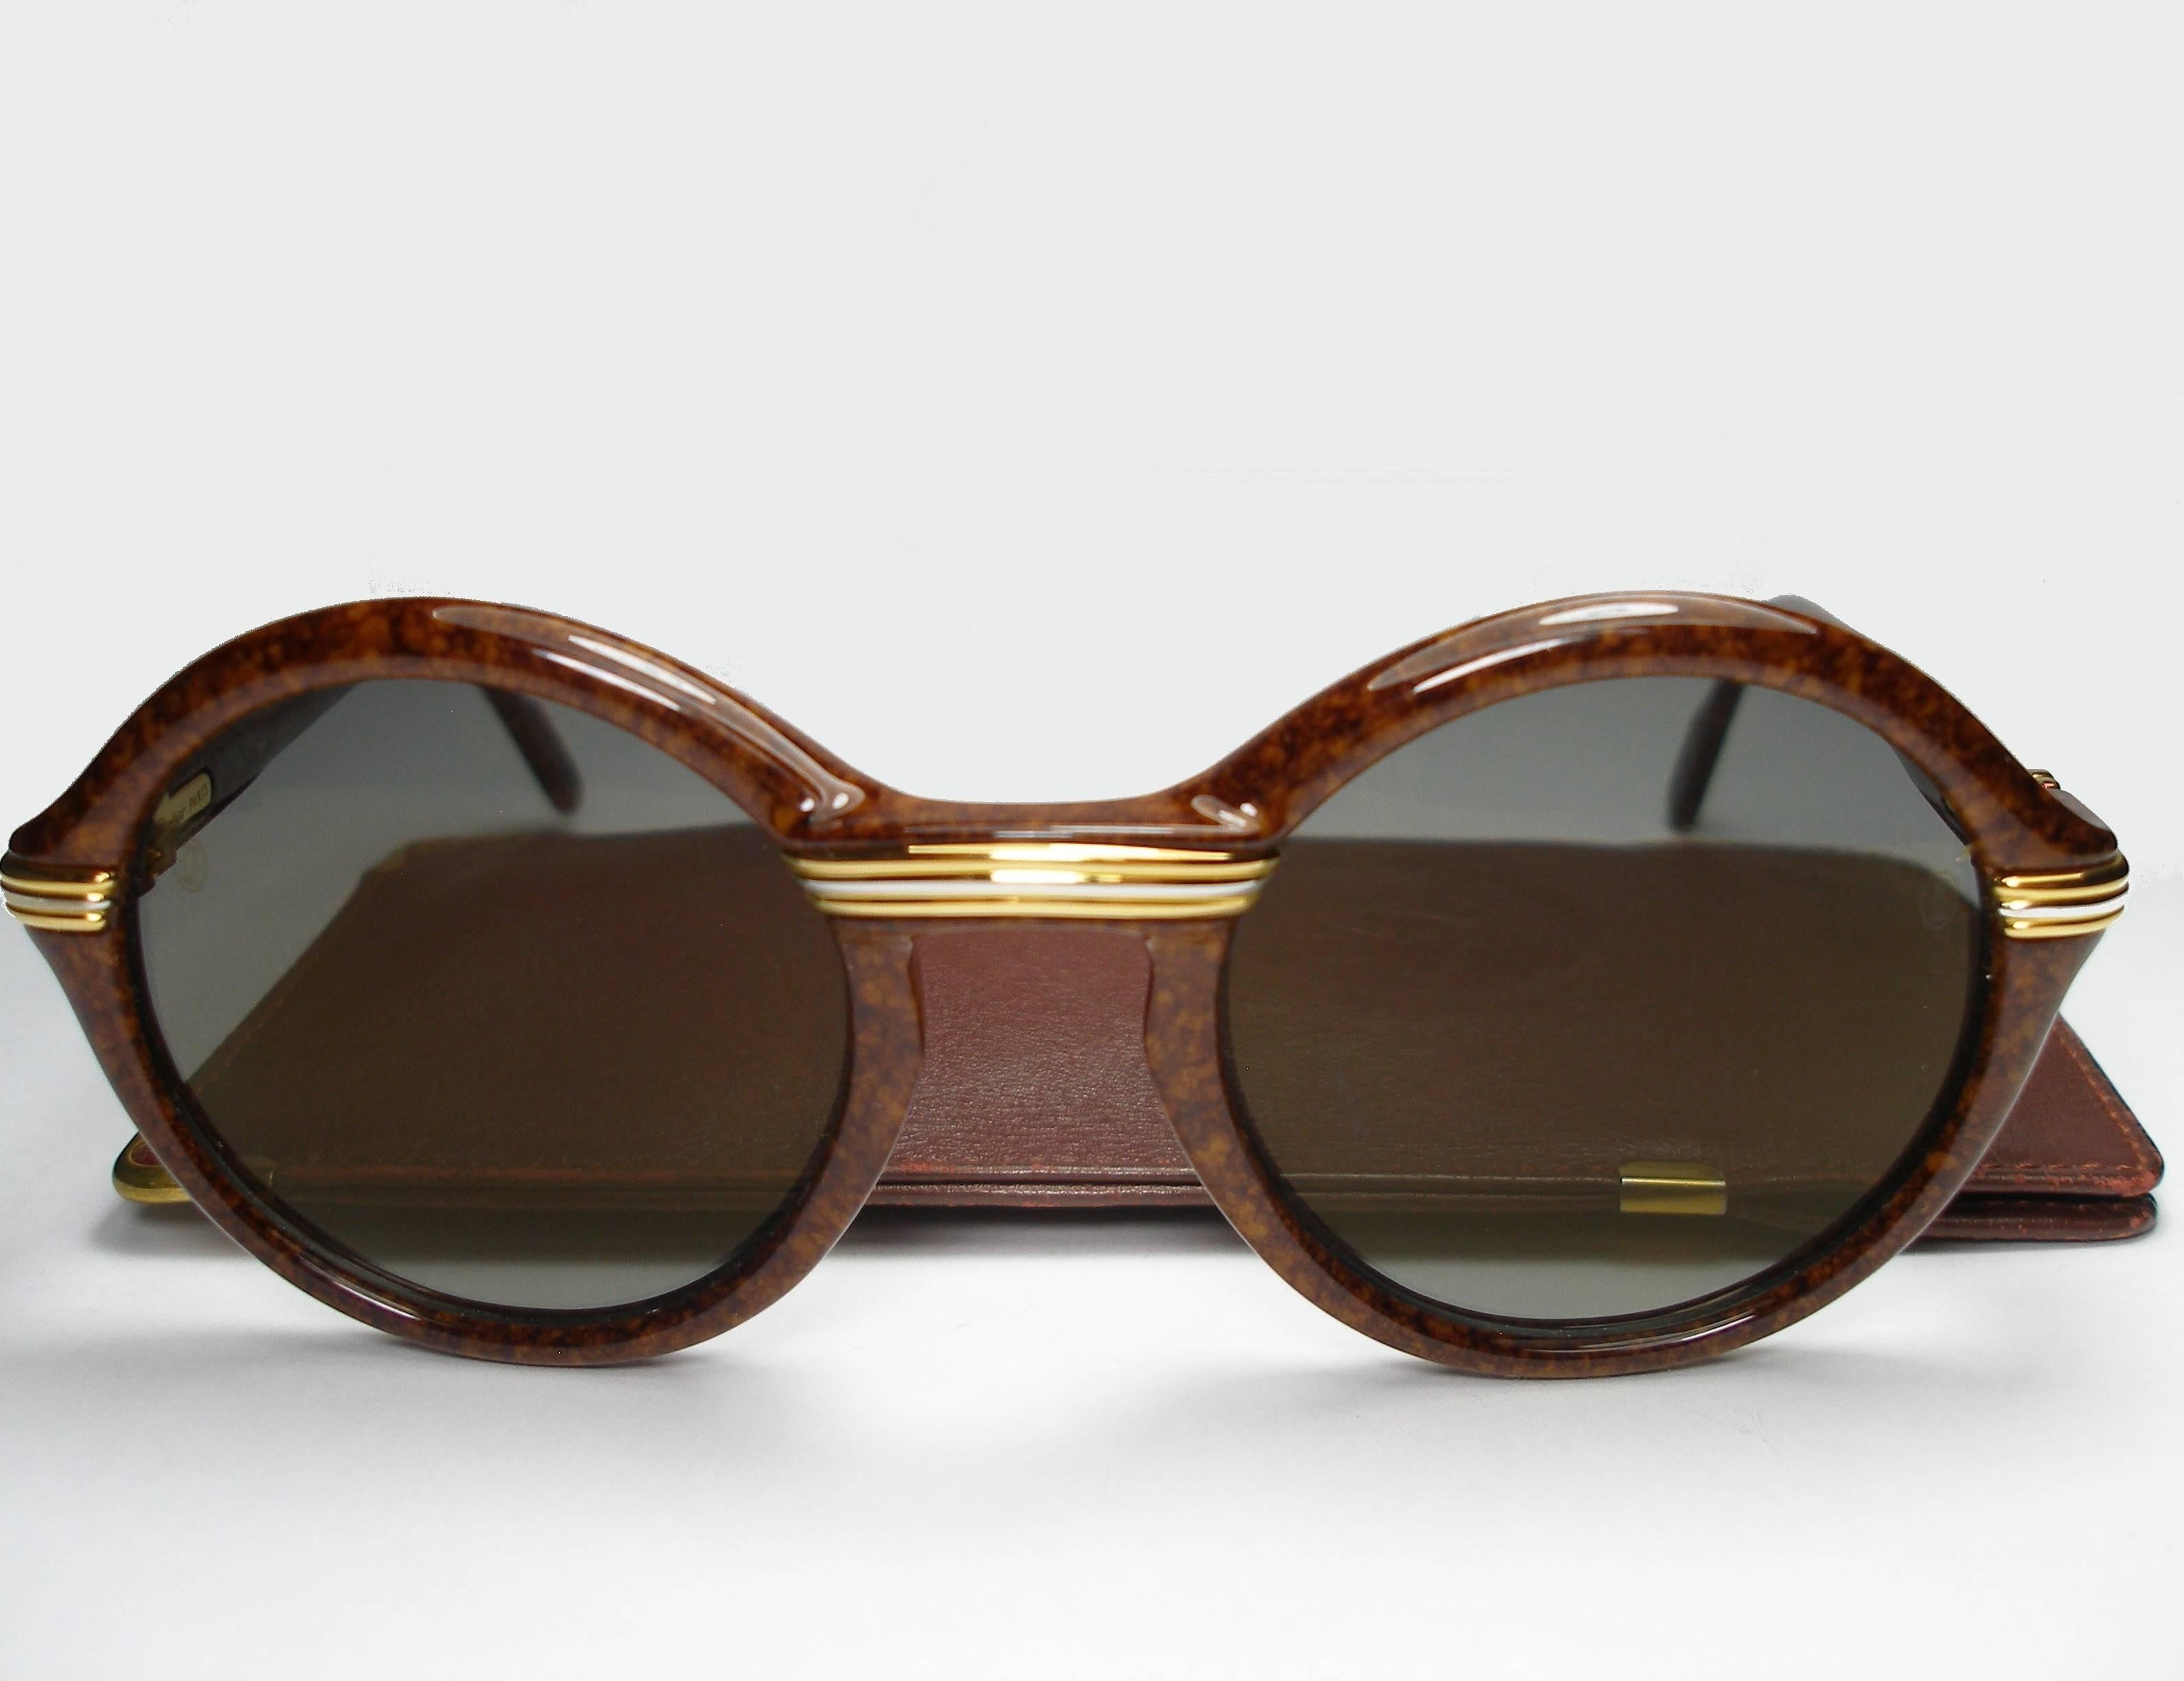 All the orders are delivered in présents packages for Christmas
Vintage and MAGNIFIC Cartier Sunglasses 1991's
All hallmarks 
Light signs of wear. Excellent condition
This item includes its original leather Cartier sunglasses case.
Colour: Brown,